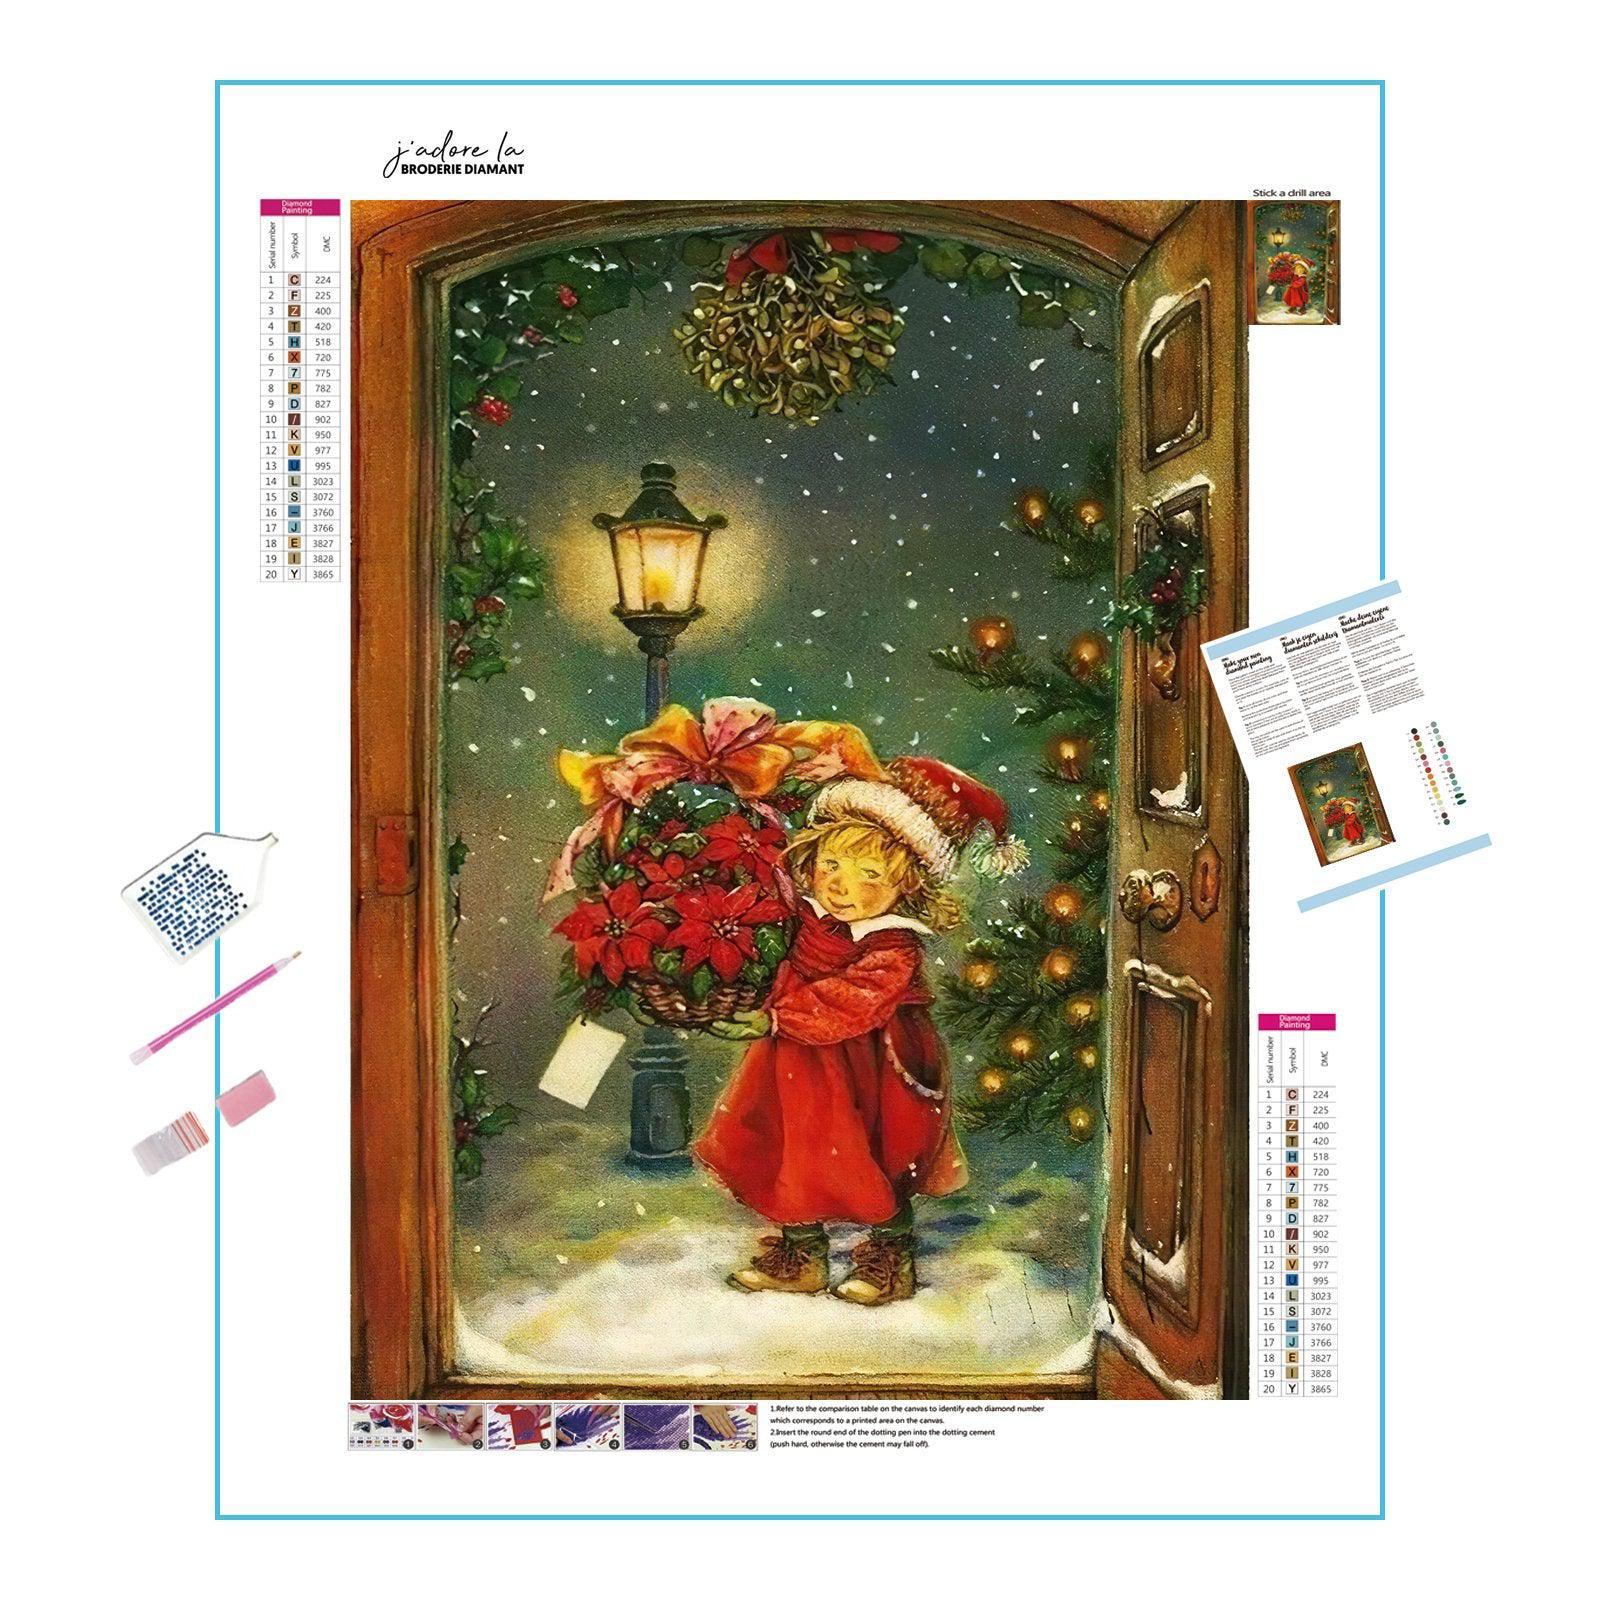 Embrace holiday spirit with a joyful girl surrounded by winter’s floral gifts. Christmas Girl With Flowers - Diamondartlove